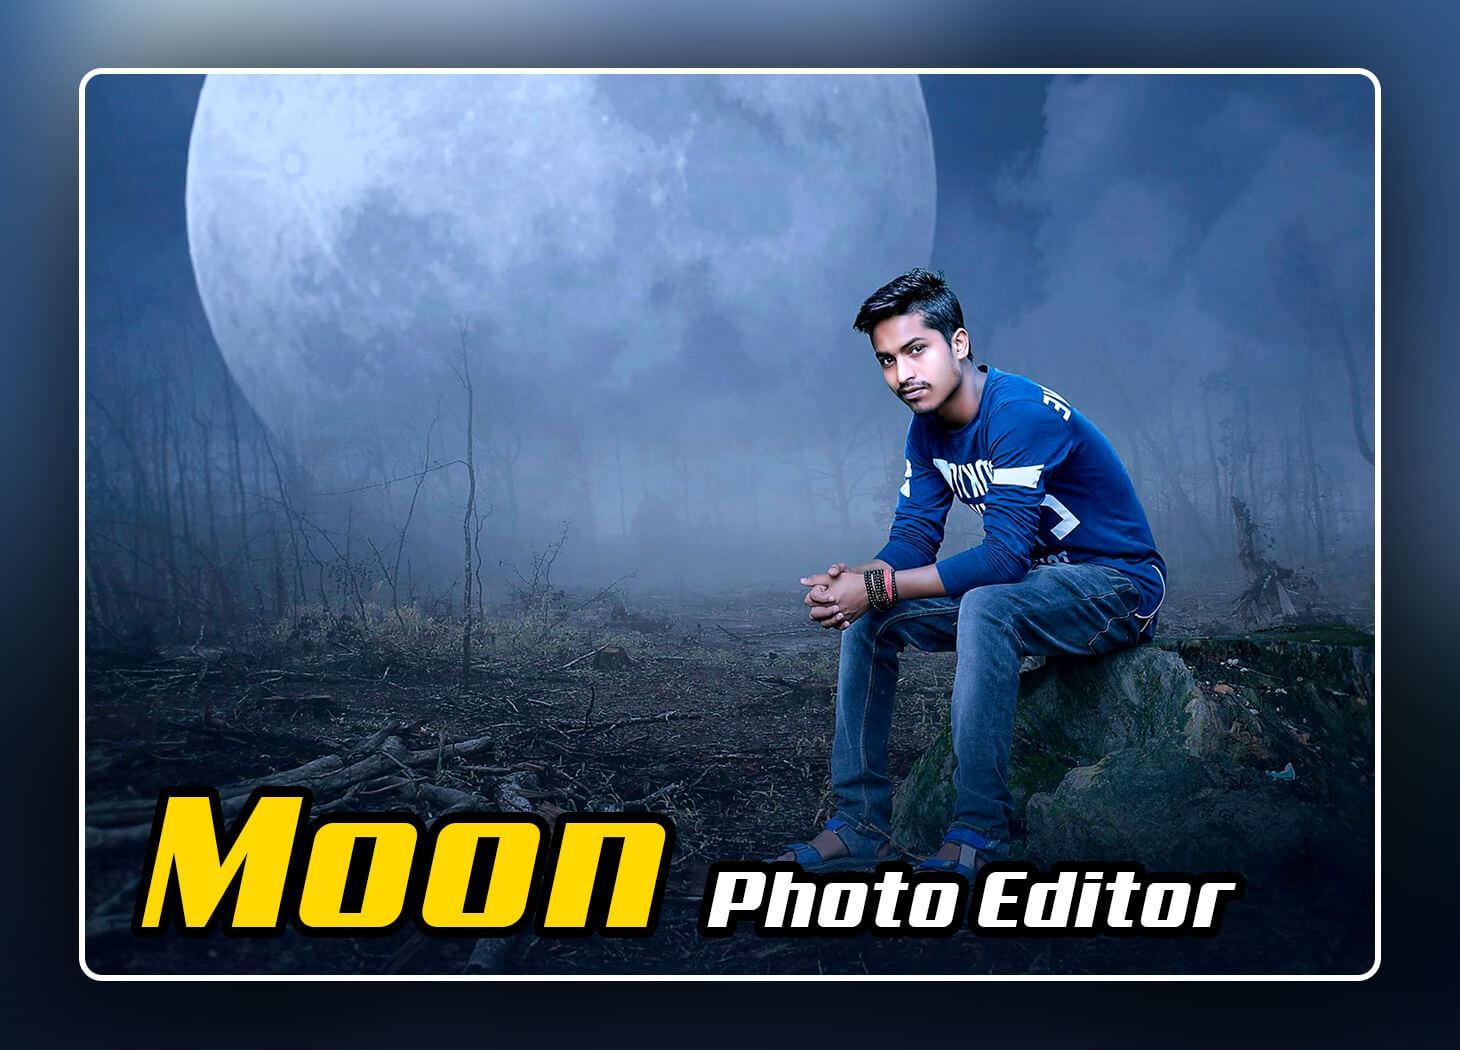 Moon Photo Editor APK for Android Download